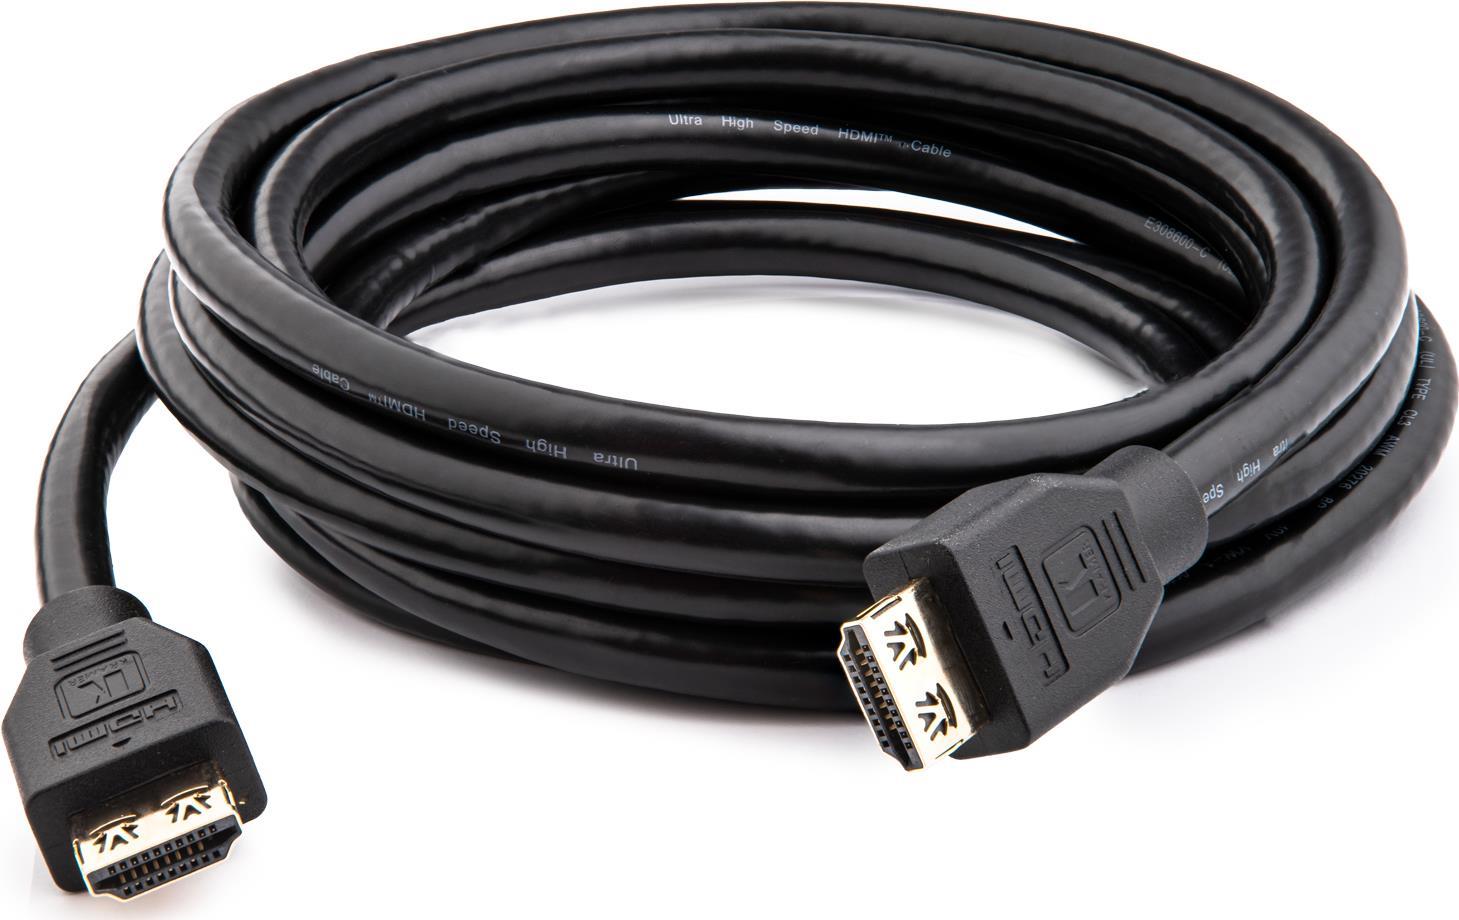 KRAMER C-HMU-3 - Ultra High-Speed HDMI Cable with Ethernet 0.90(M) (97-0102003)